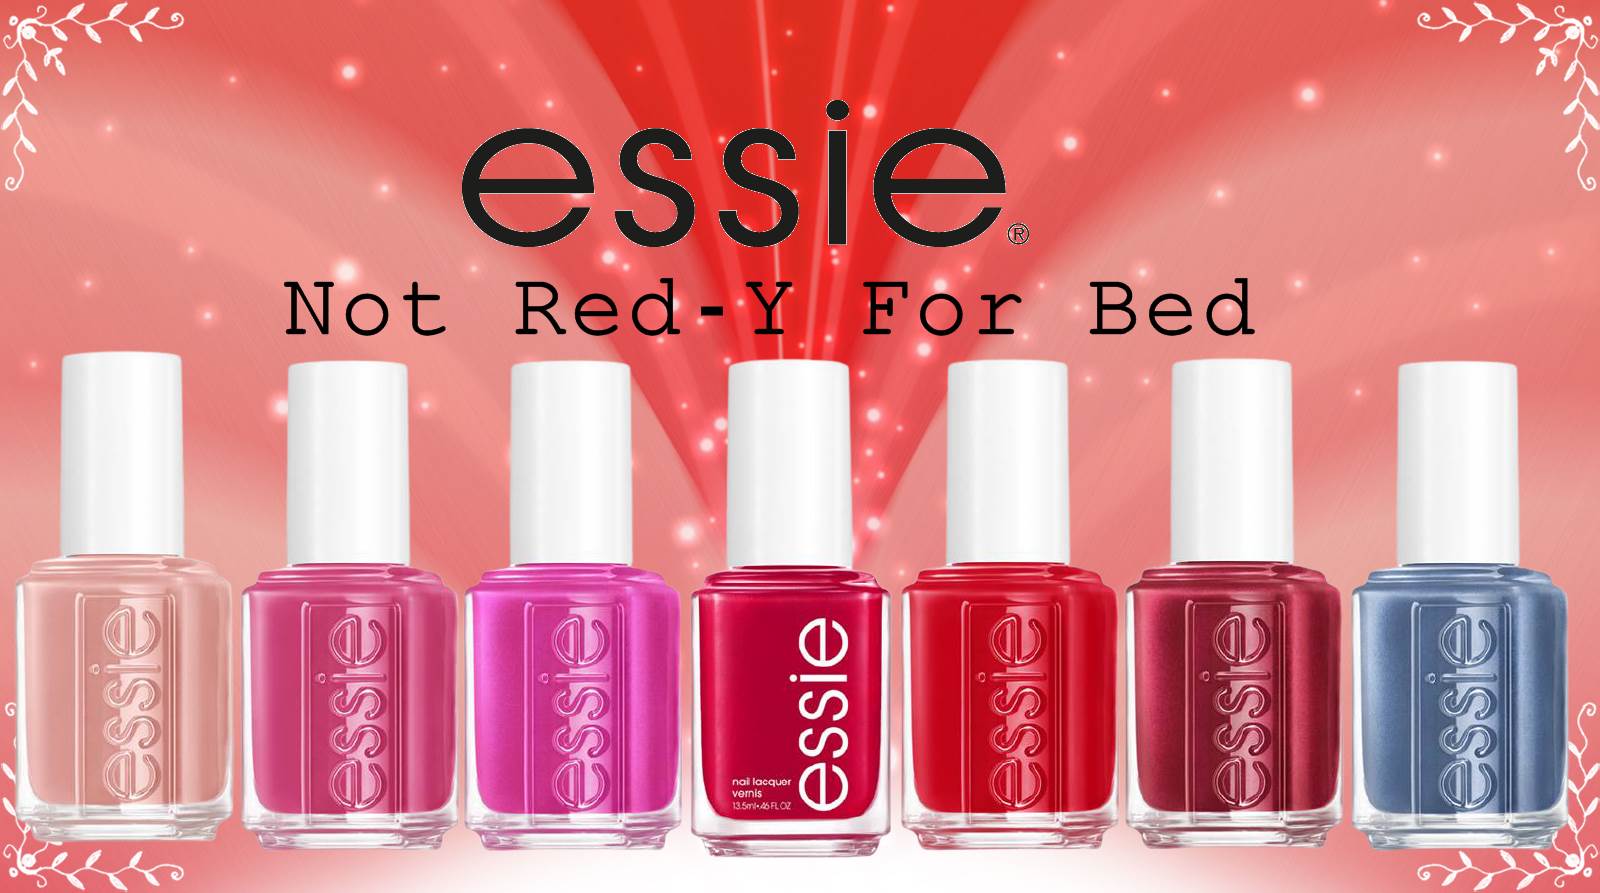 For – Essie Review Not Nail Red-y Collection Bed Polish & Essie Images